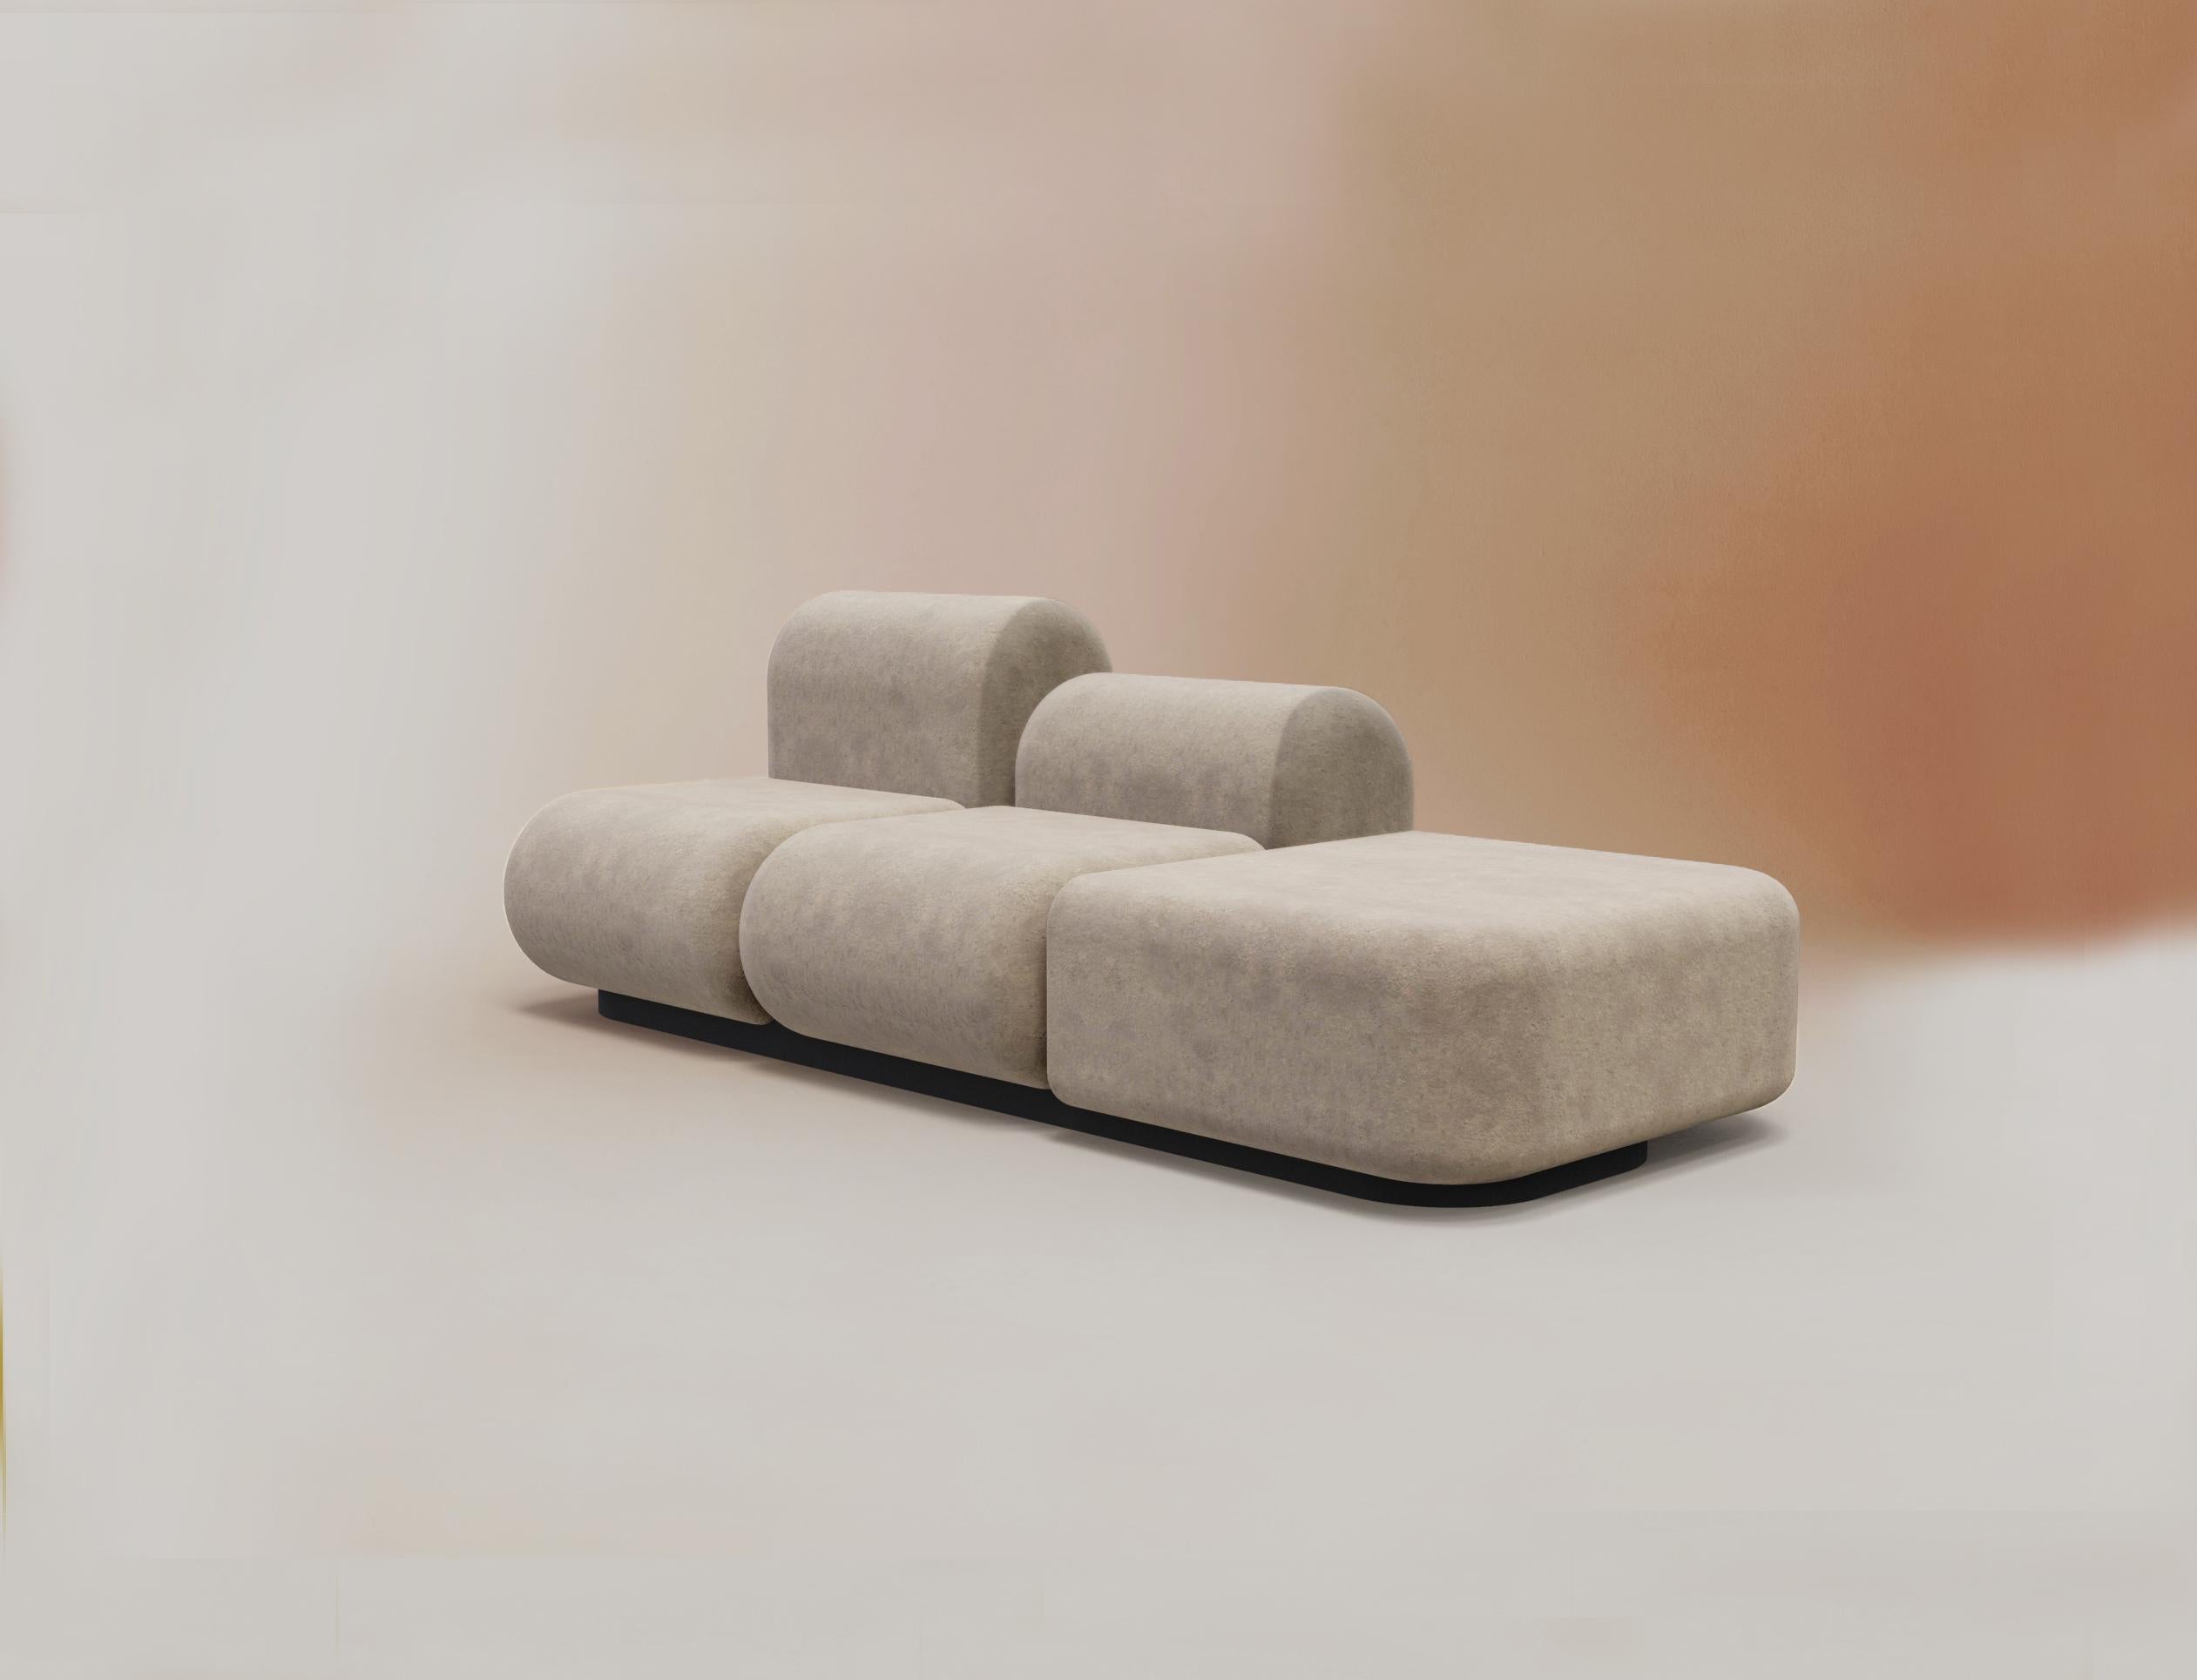 Our Bob sofa is one of the newest pieces in the collection. In addition to its modular structure, which allows us to adapt it to any space, it has an architectural and smooth shape that makes it a versatile and unique piece at the same time. The